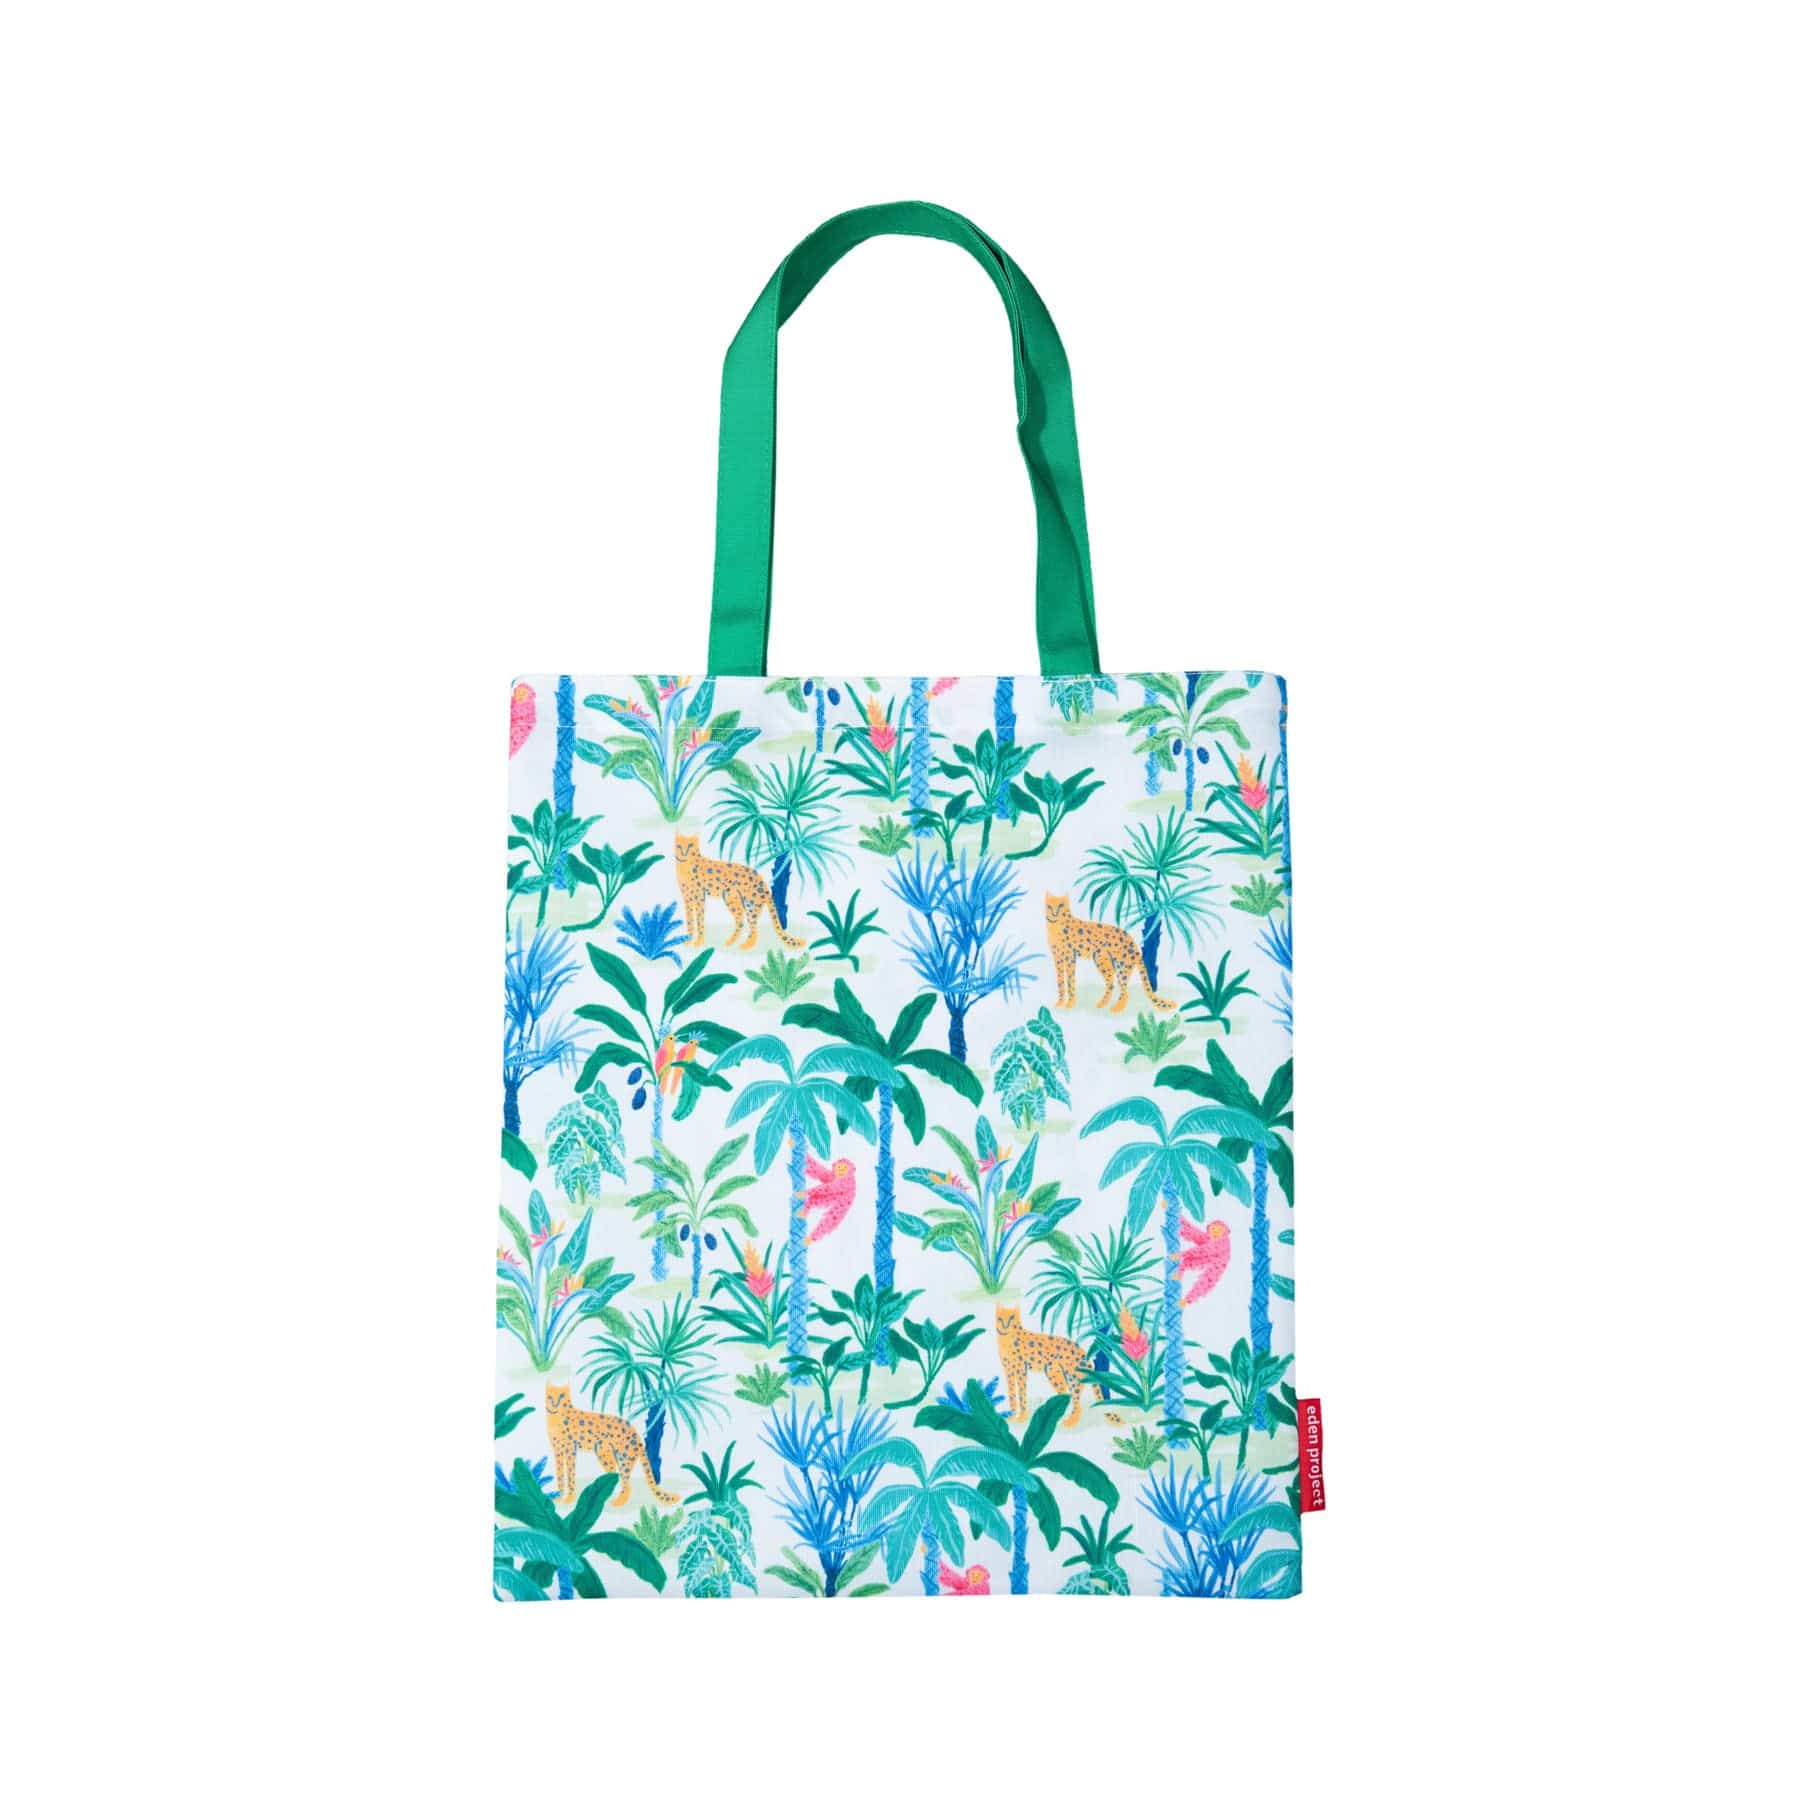 Colorful tropical print tote bag with palm trees, leopards, and foliage design against a white background with green handles and a visible brand tag.